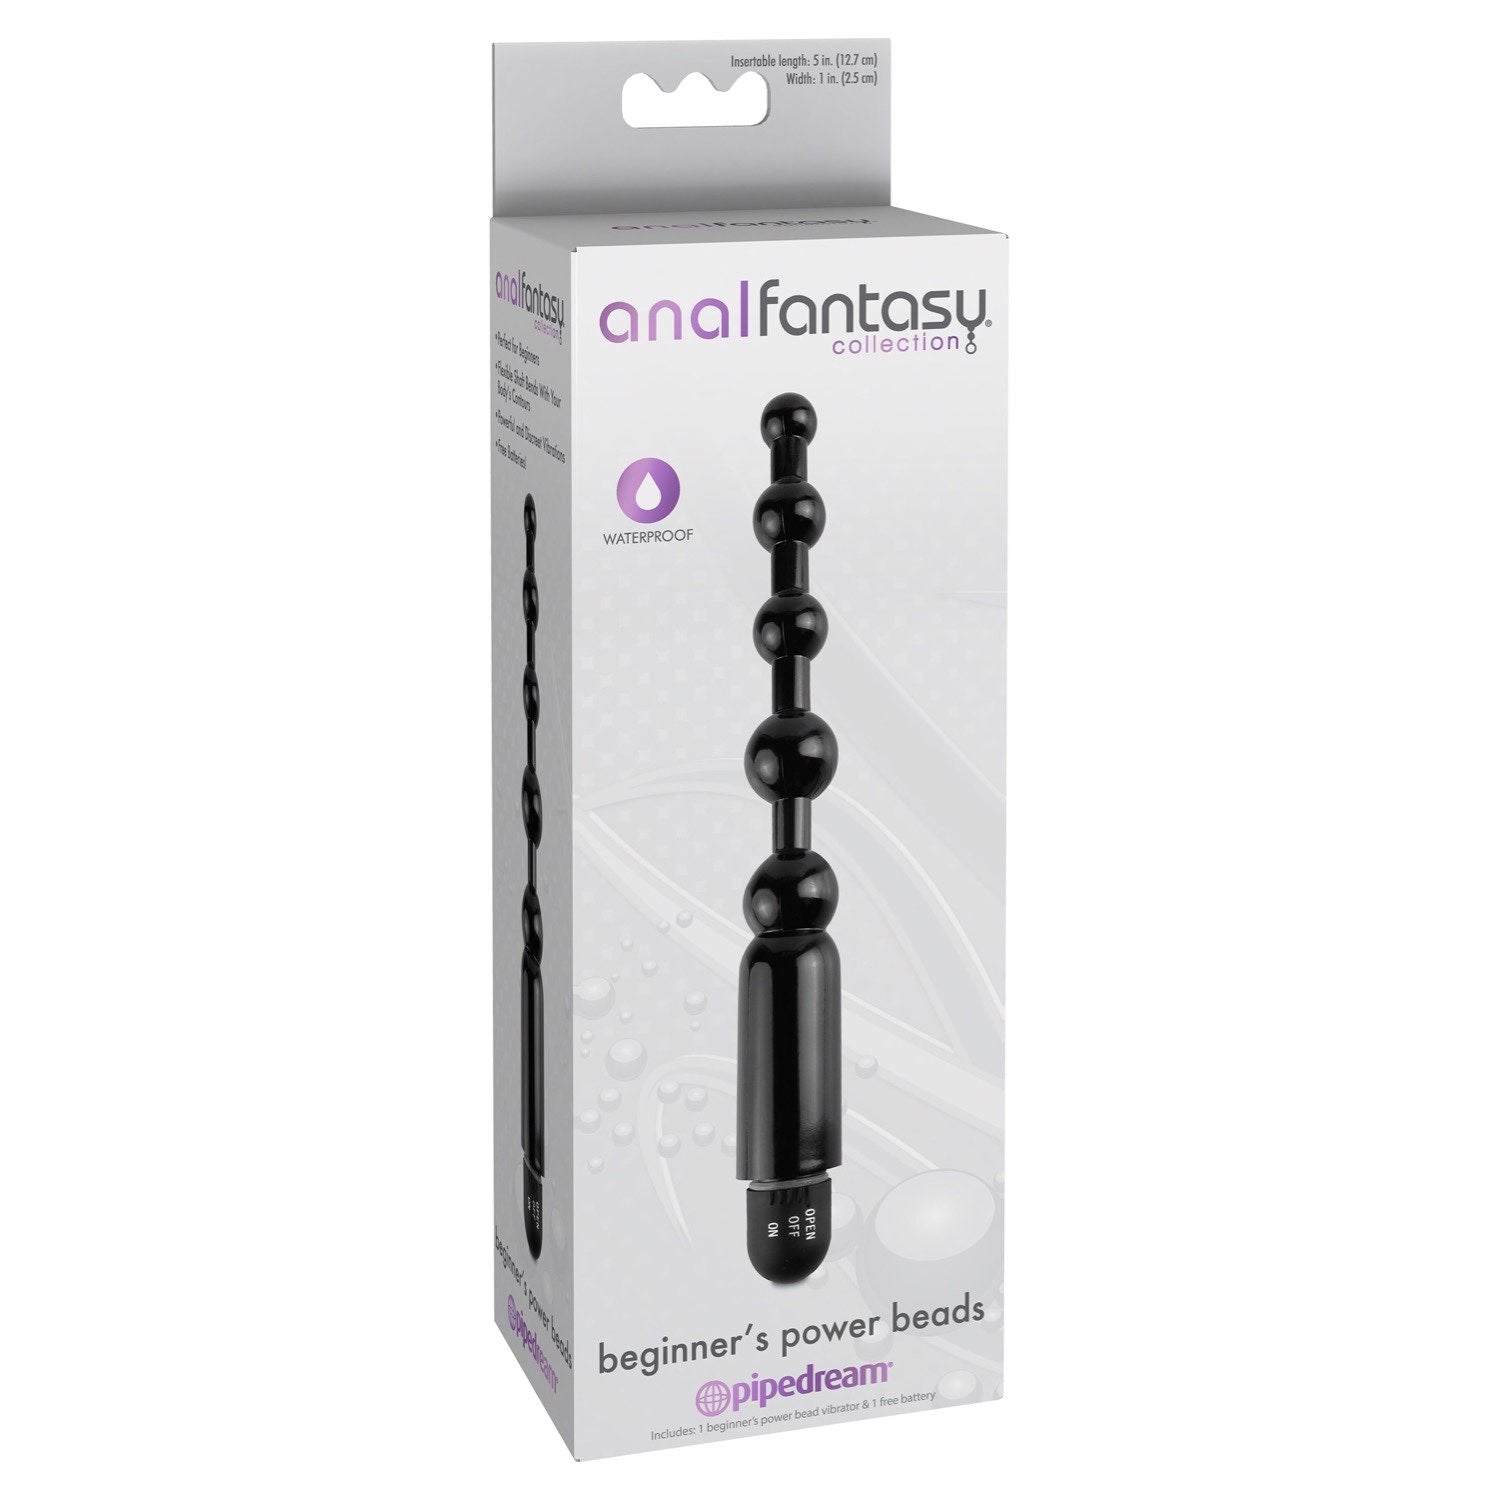 Anal Fantasy Collection Beginner&#39;s Power Beads - Black 12.7 cm (5&quot;) Vibrating Anal Beads by Pipedream